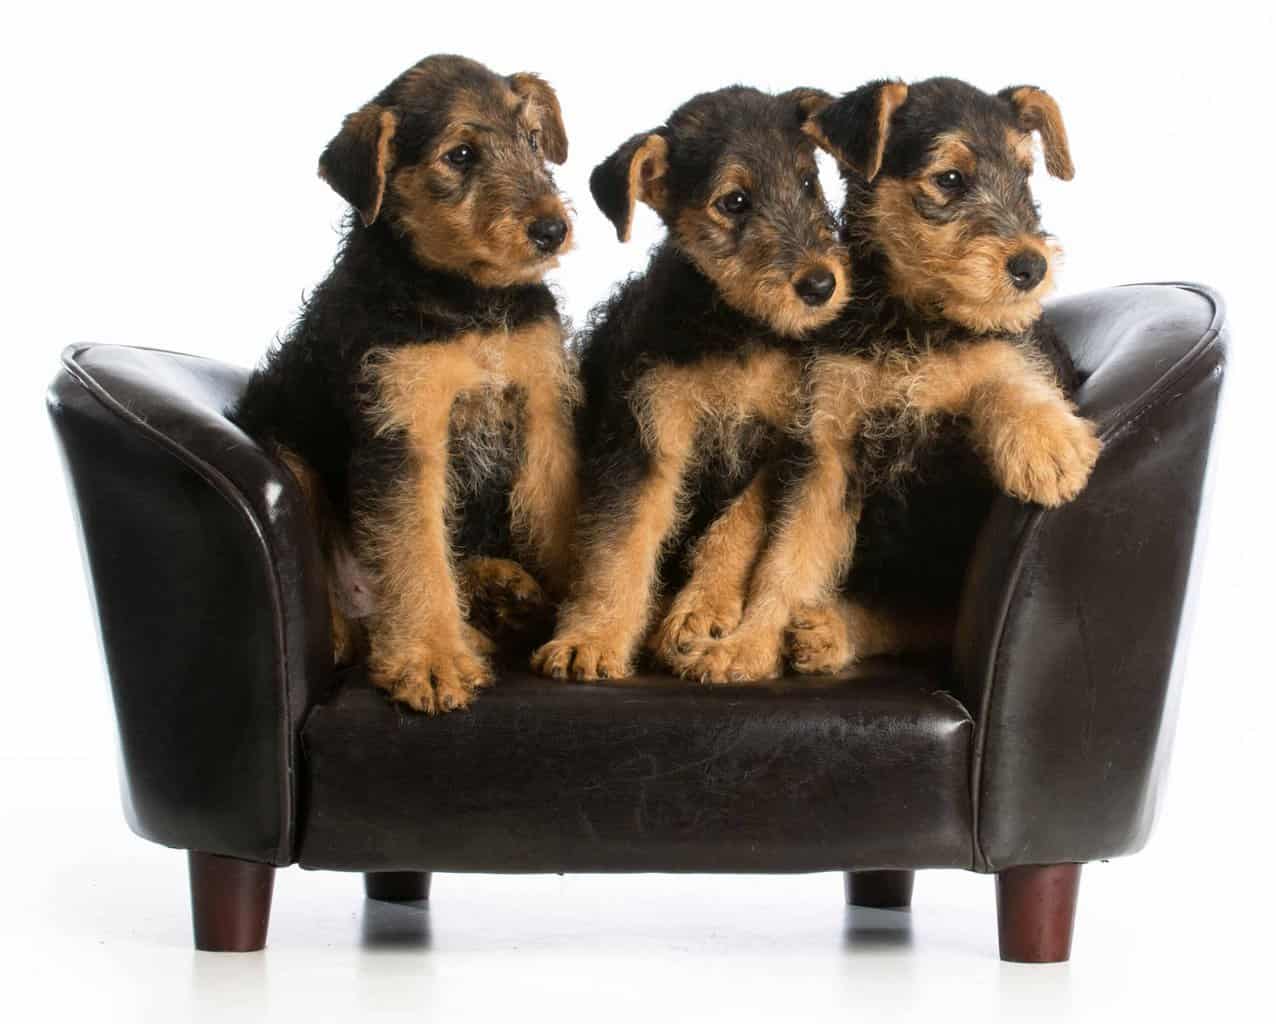 Trio of Airedale Terrier puppies. Airedale Terriers are prone to obesity, so it's essential to watch the amount of food you give them.